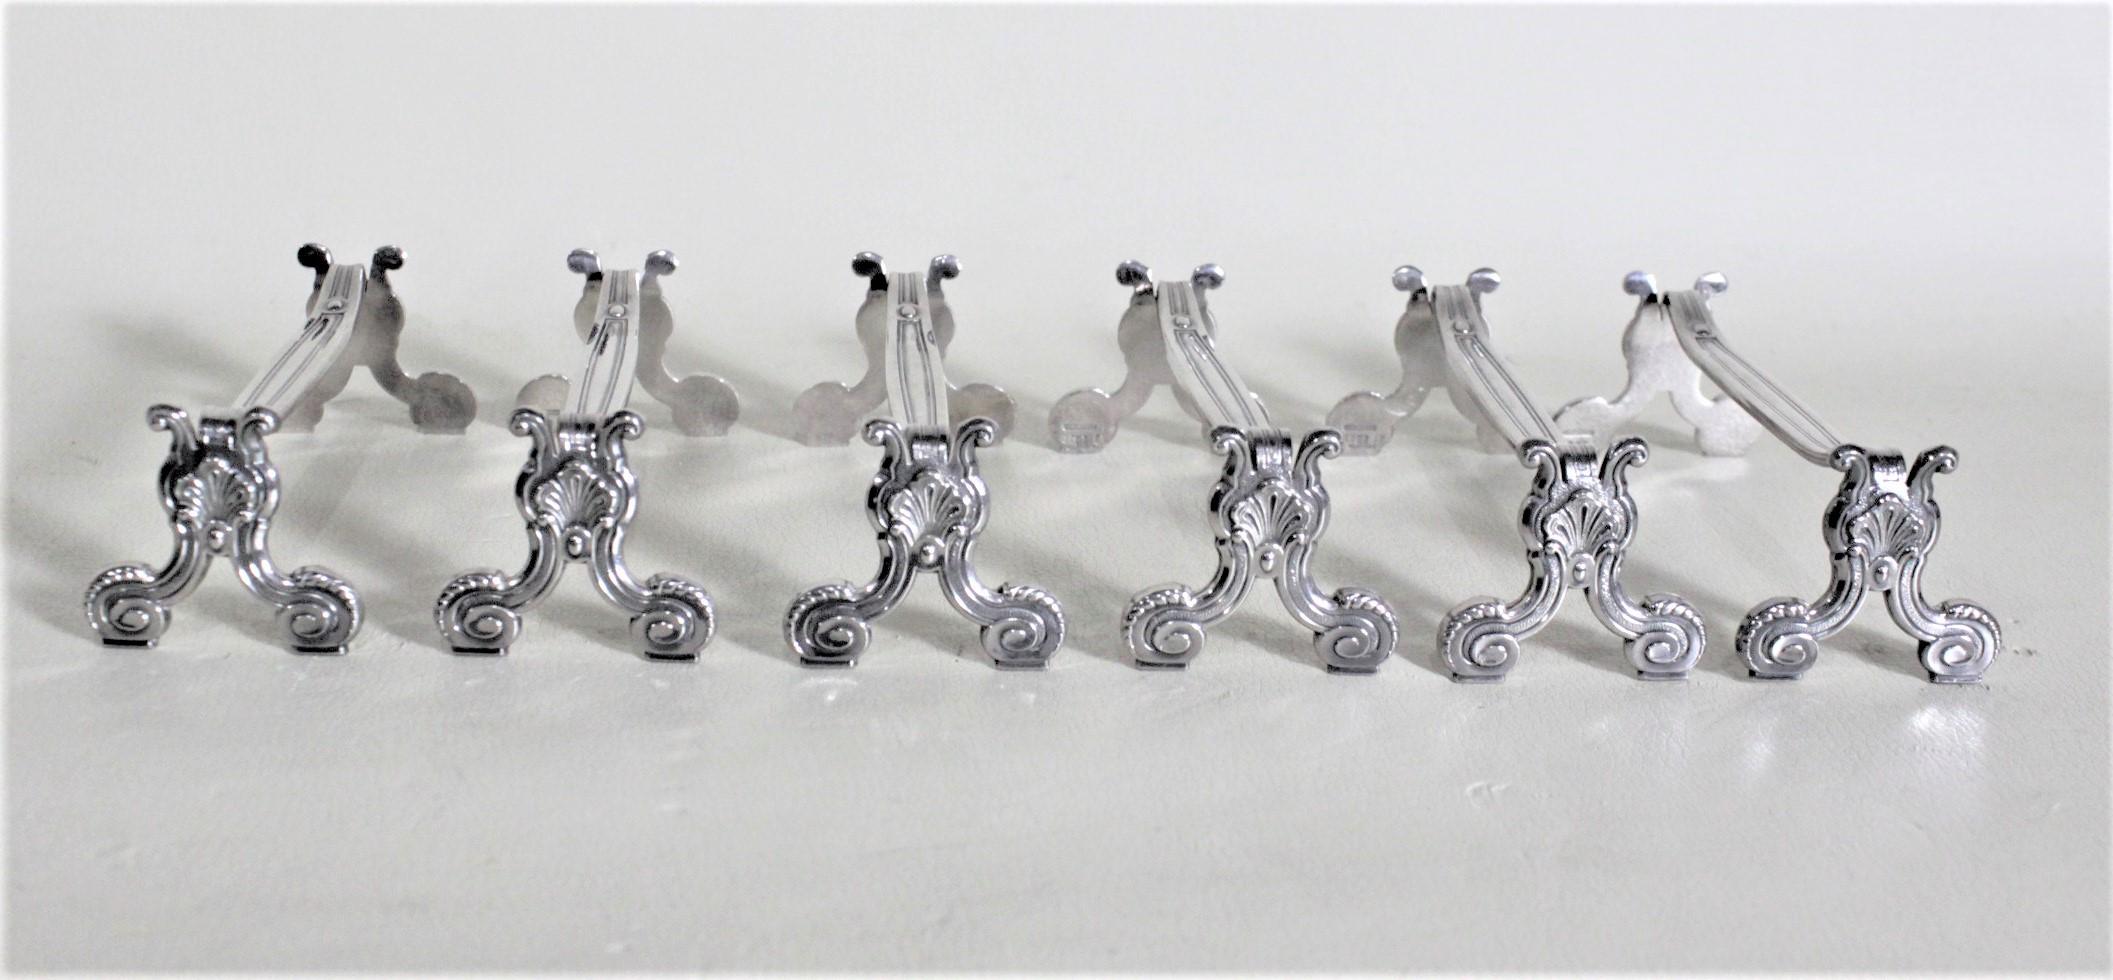 This set of six silver plated knife rests were made by Christofle of France in approximately 1960 in an antique style. The knife rests have nicely decorated serpentine side panels with rounded feet and platform stretchers. Each knife rest is clearly